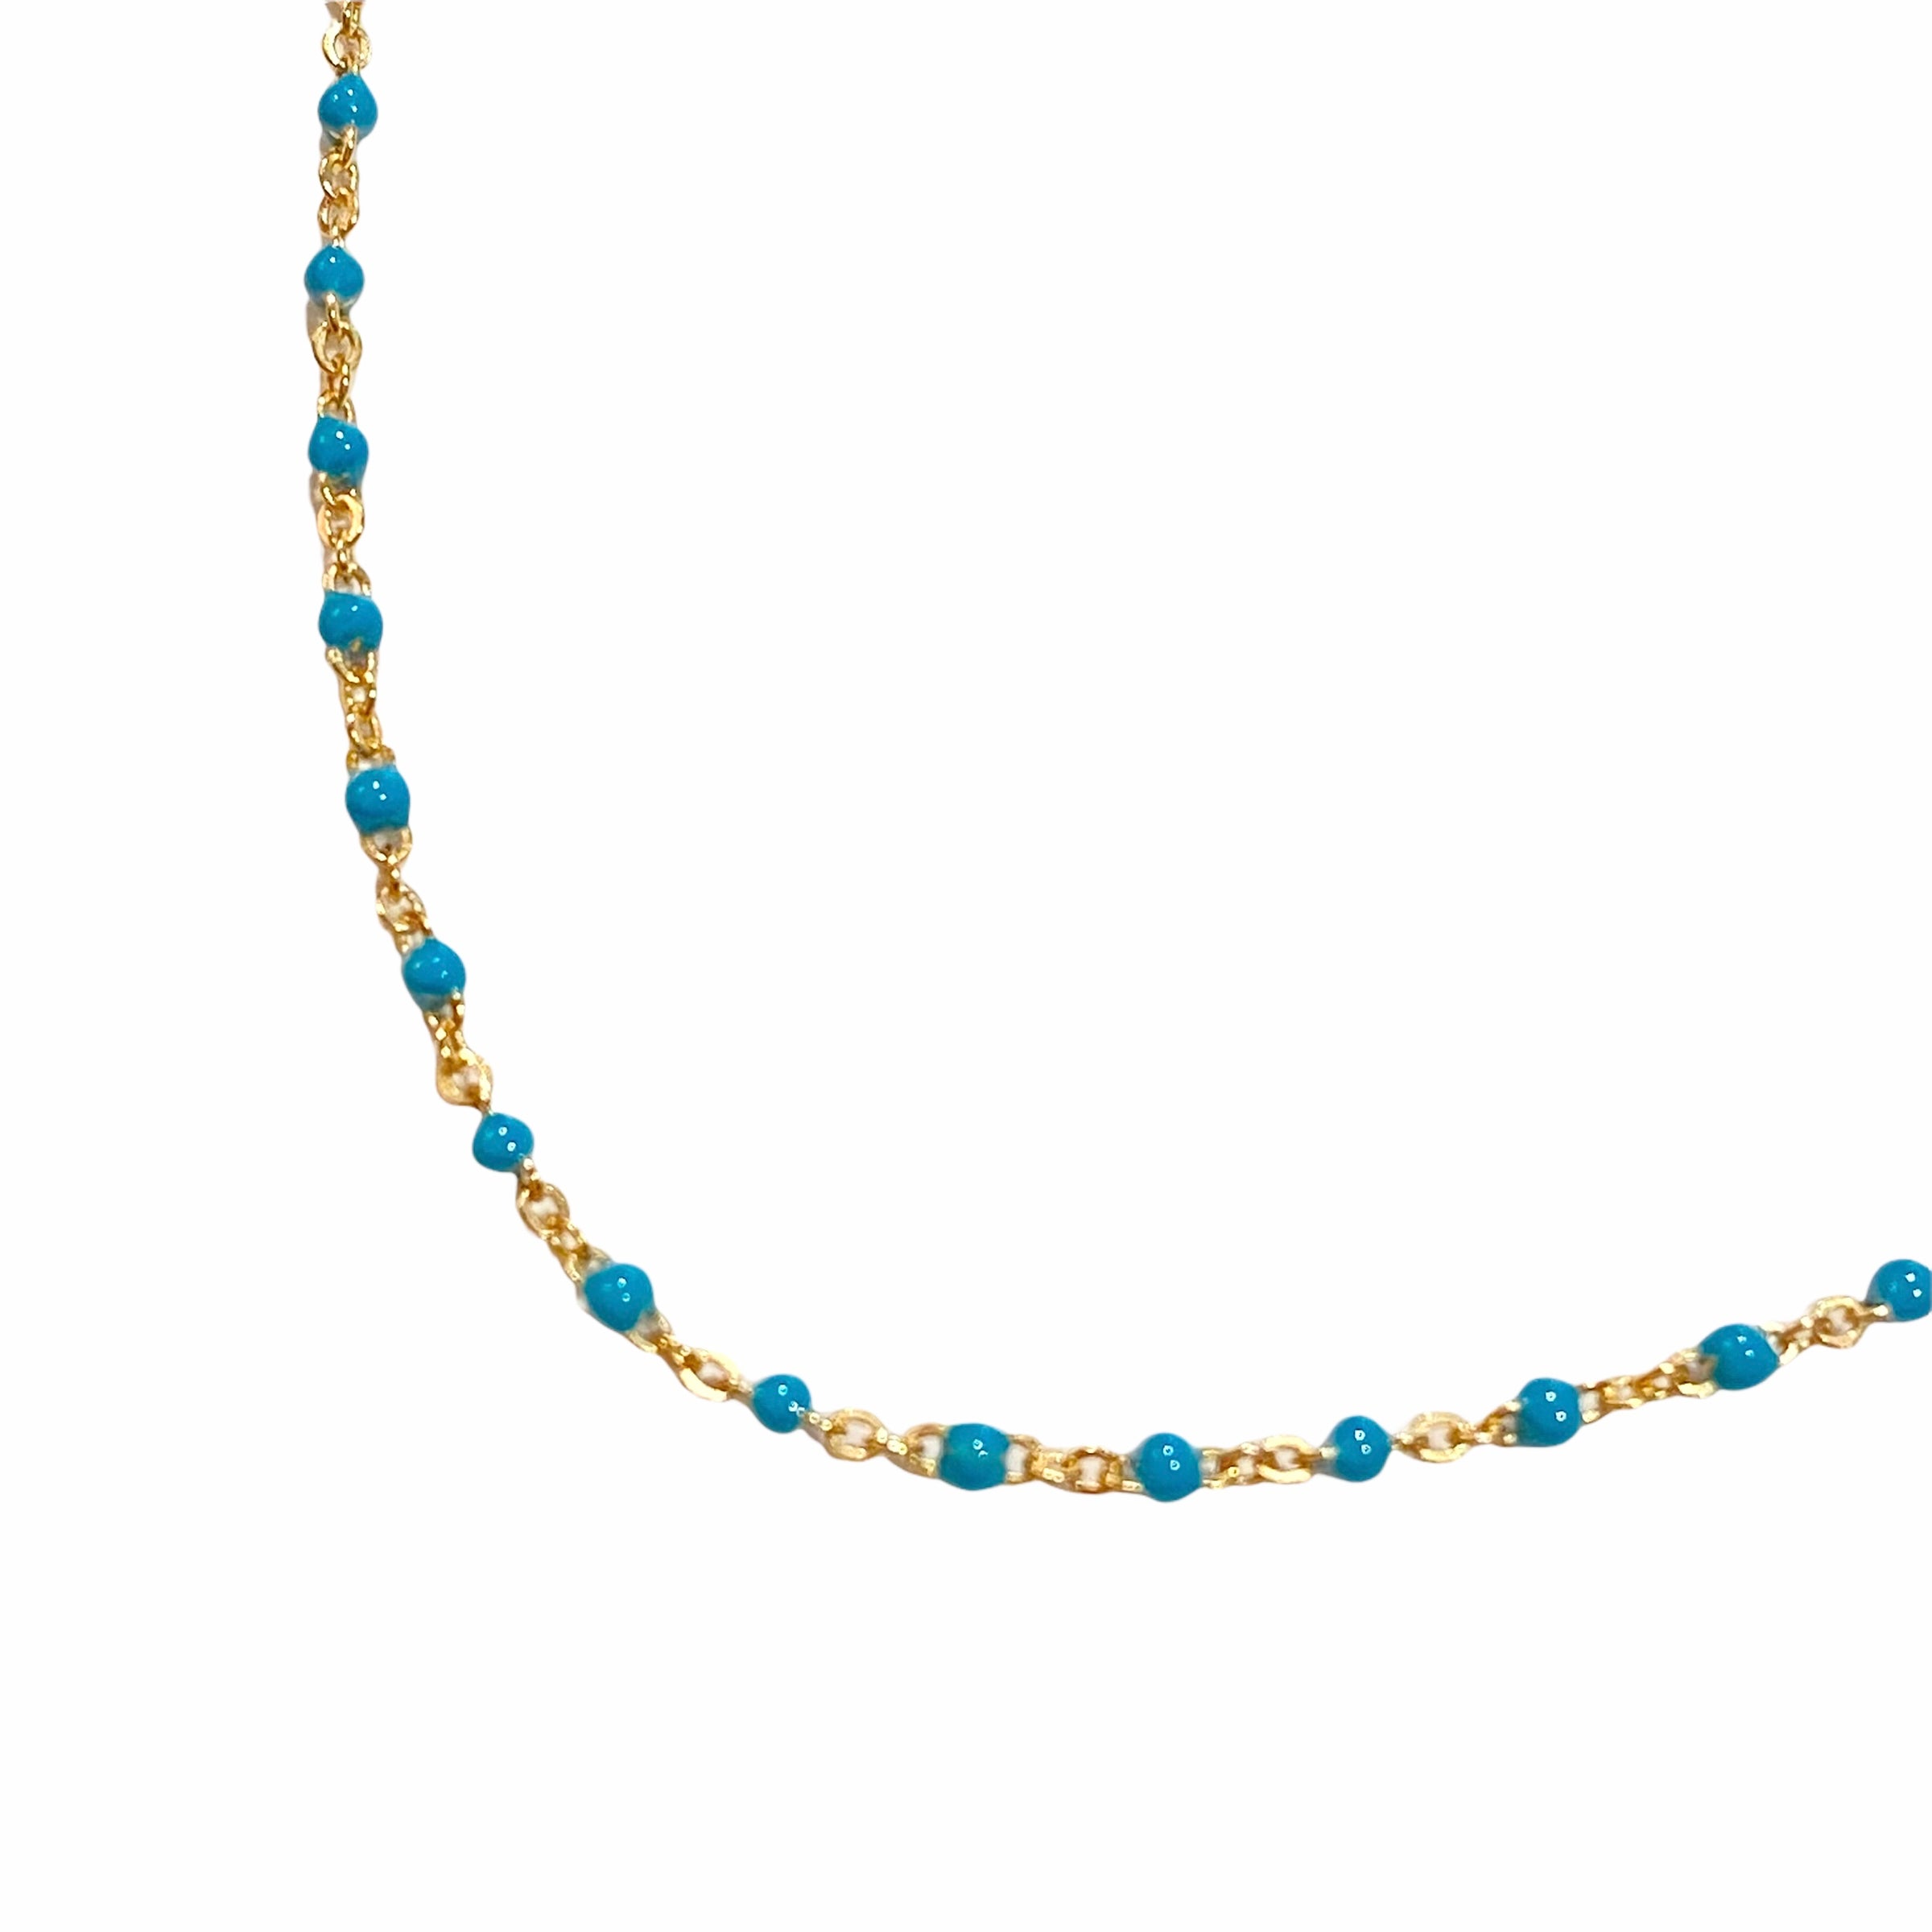 Beaded Color Chain Necklace